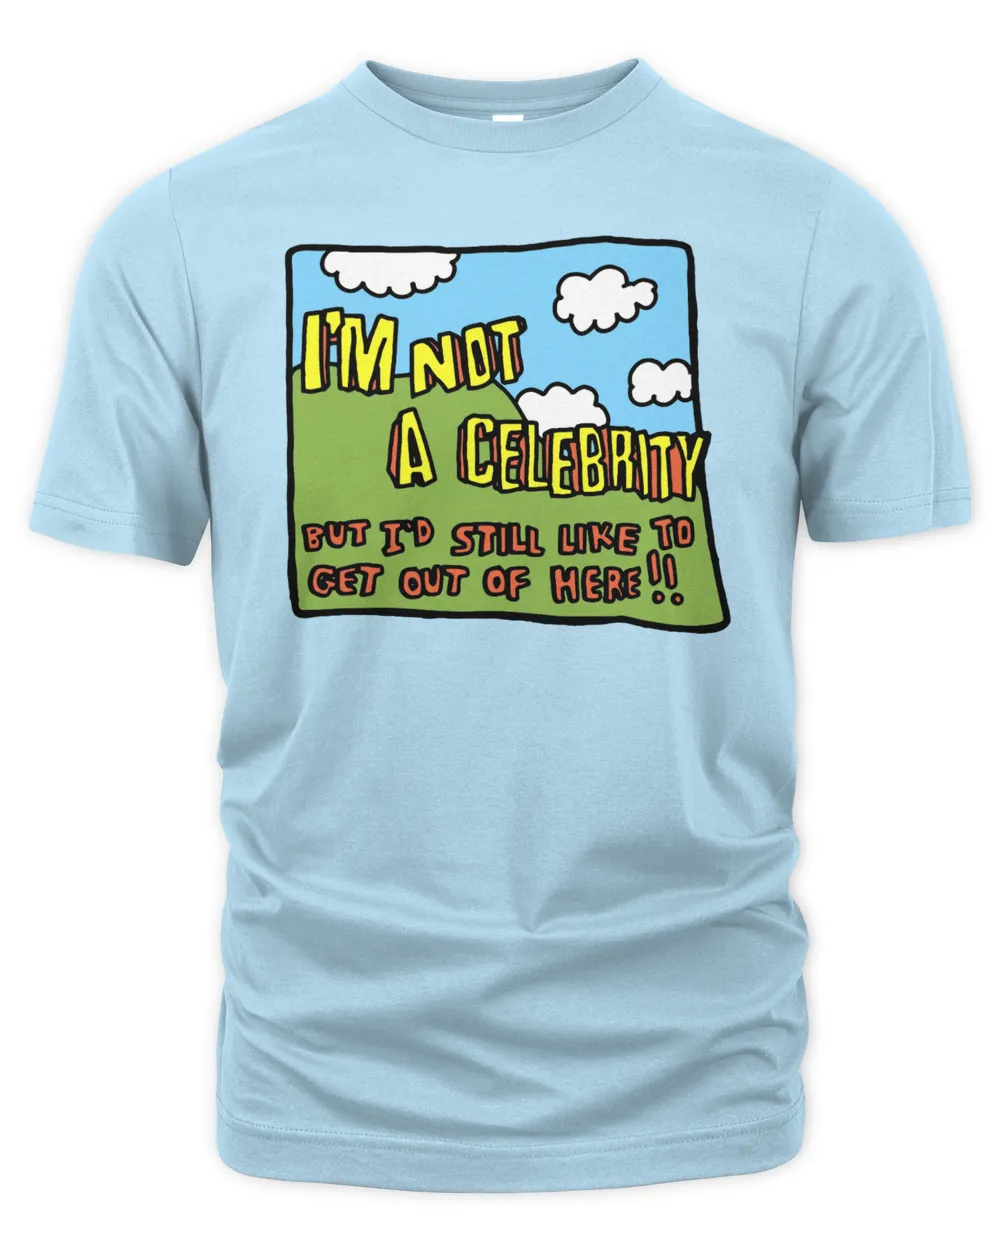 I'm Not A Celebrity But I'd Still Like To Get Out Of Here T Shirt Men's Premium Tshirt light-blue 